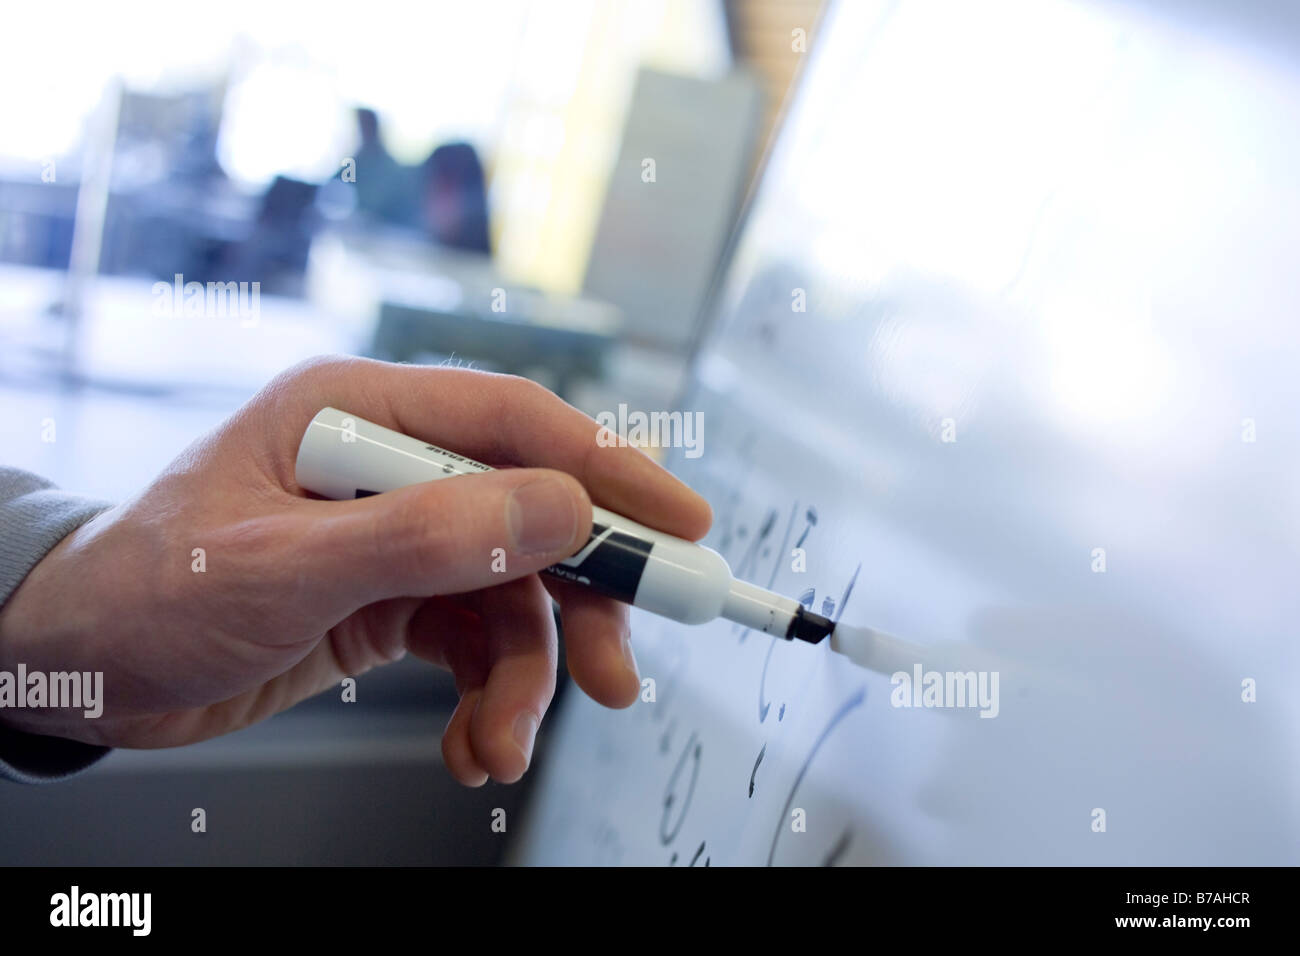 A man s hand writing mathematical equations on a whiteboard Stock Photo